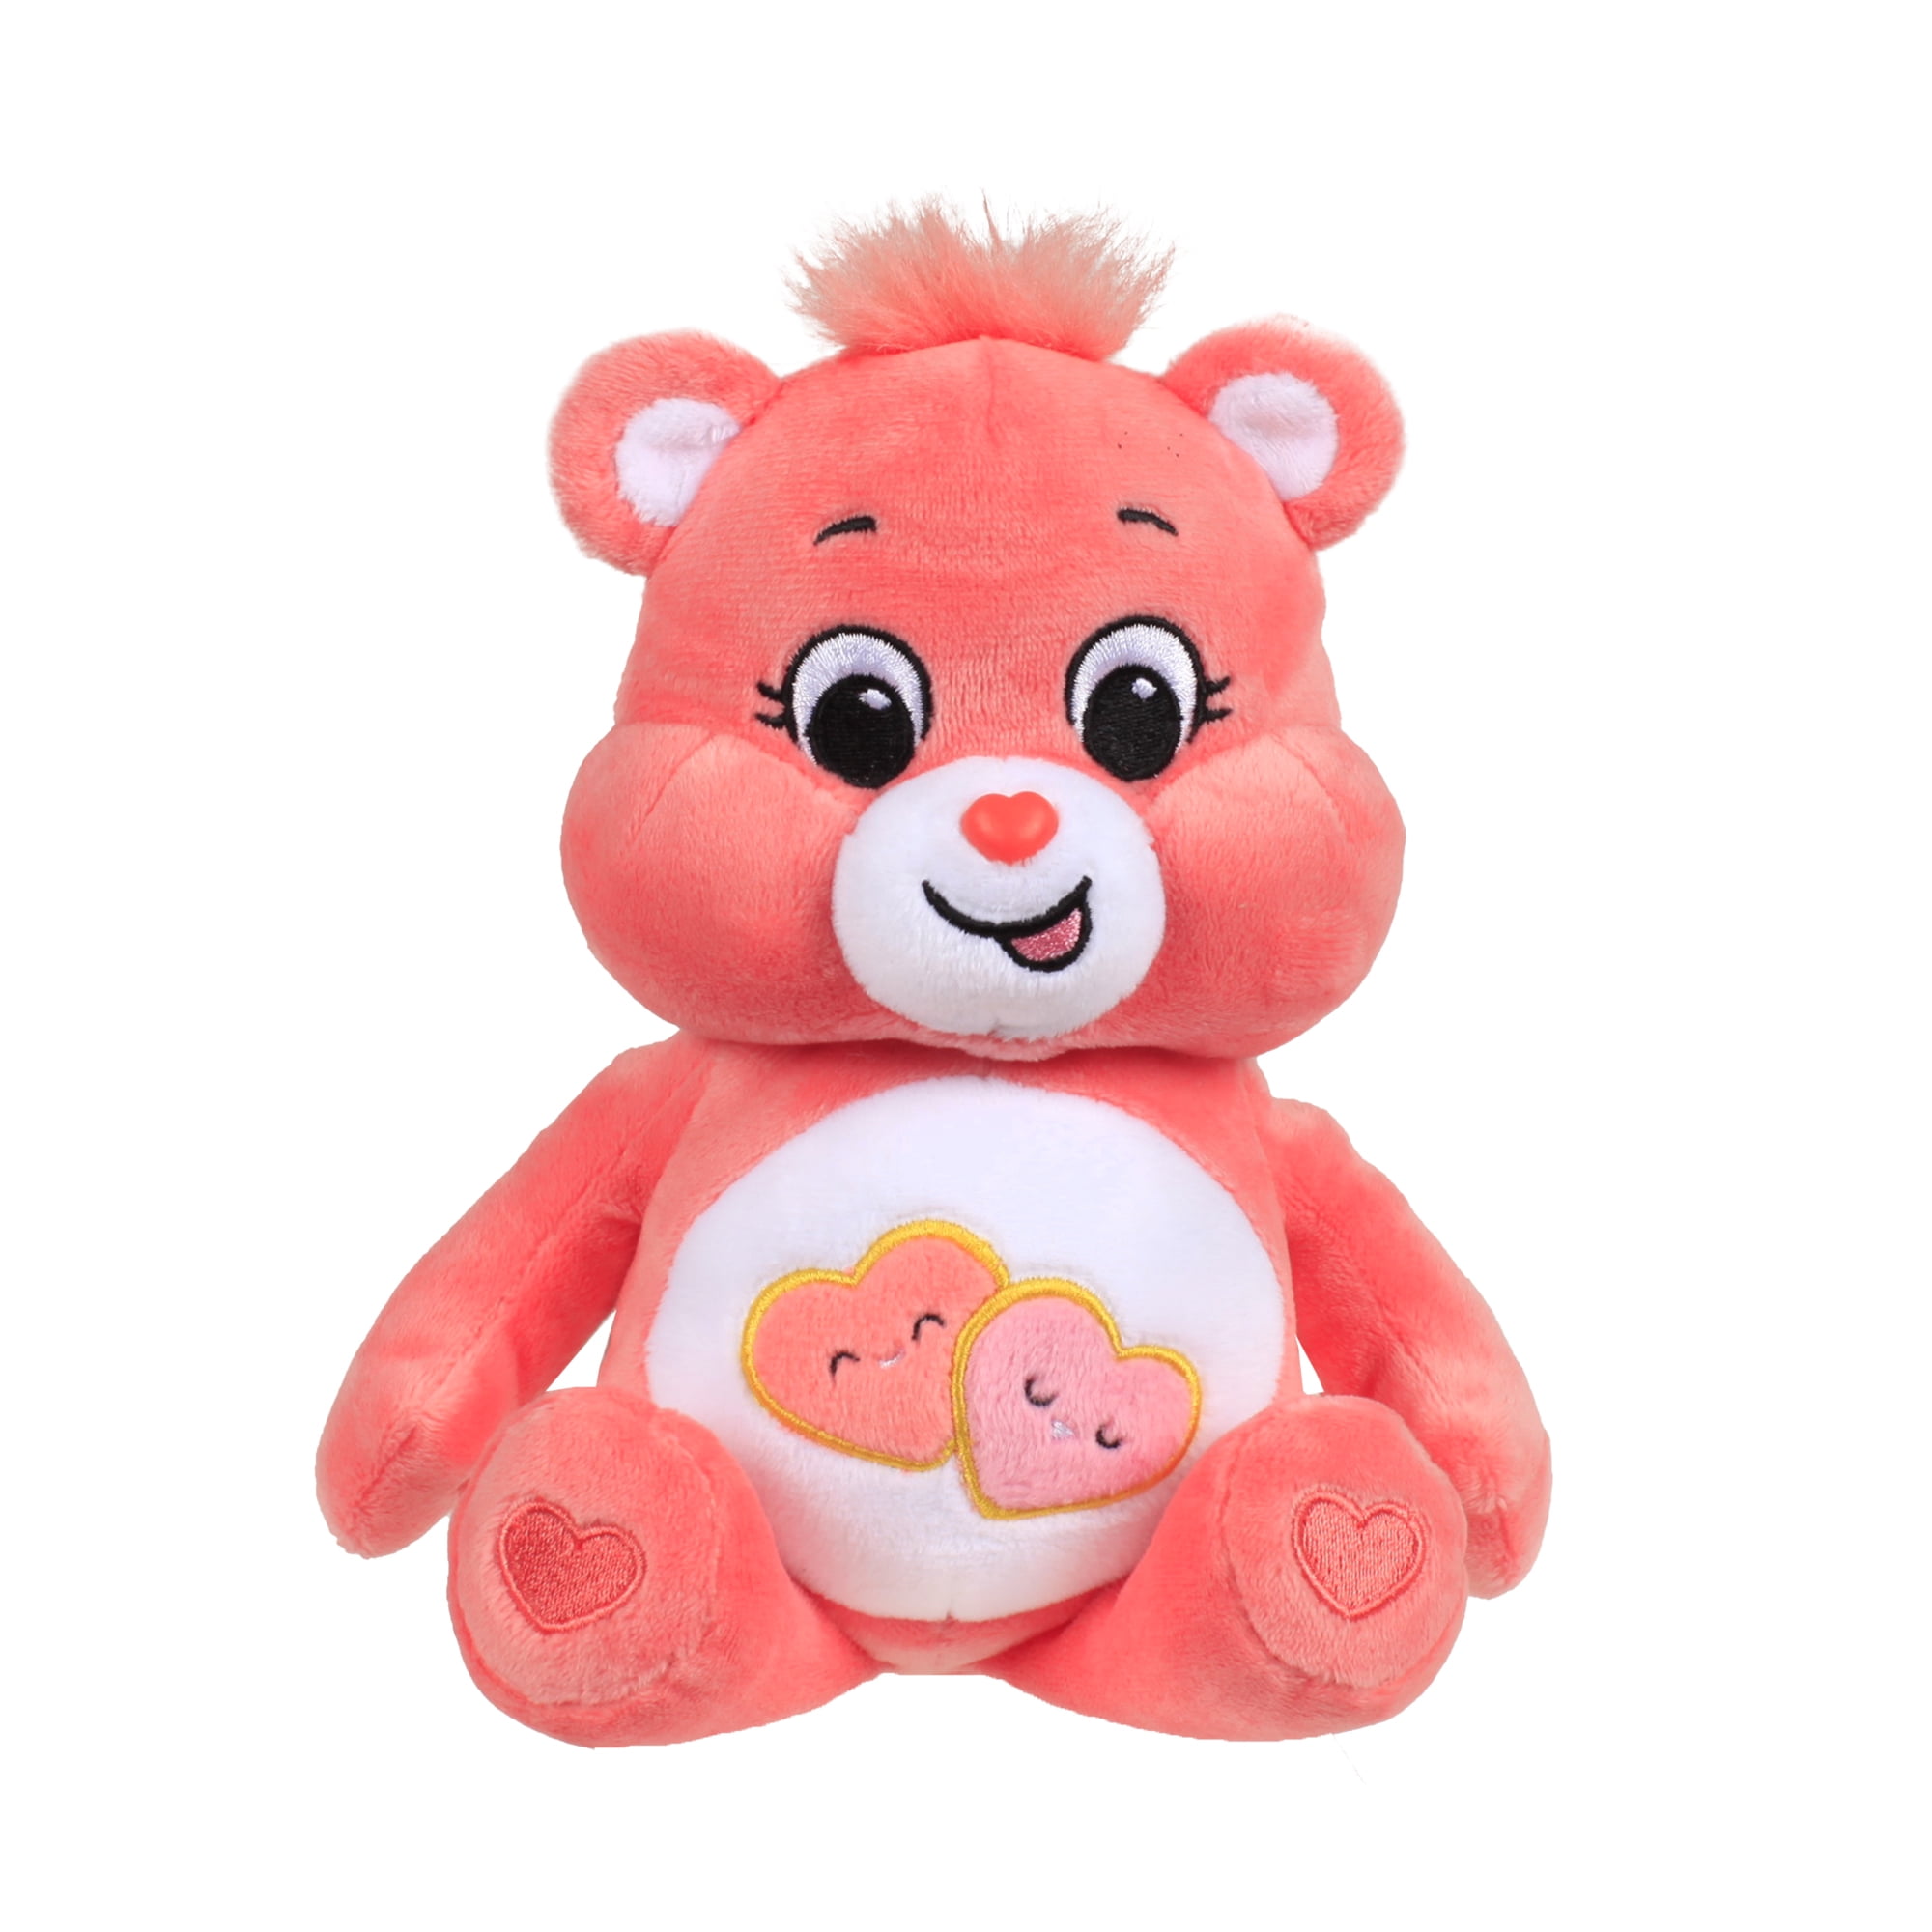 9" Bean Plush Details about   NEW 2020 Care Bears Share Bear Soft Huggable Material 